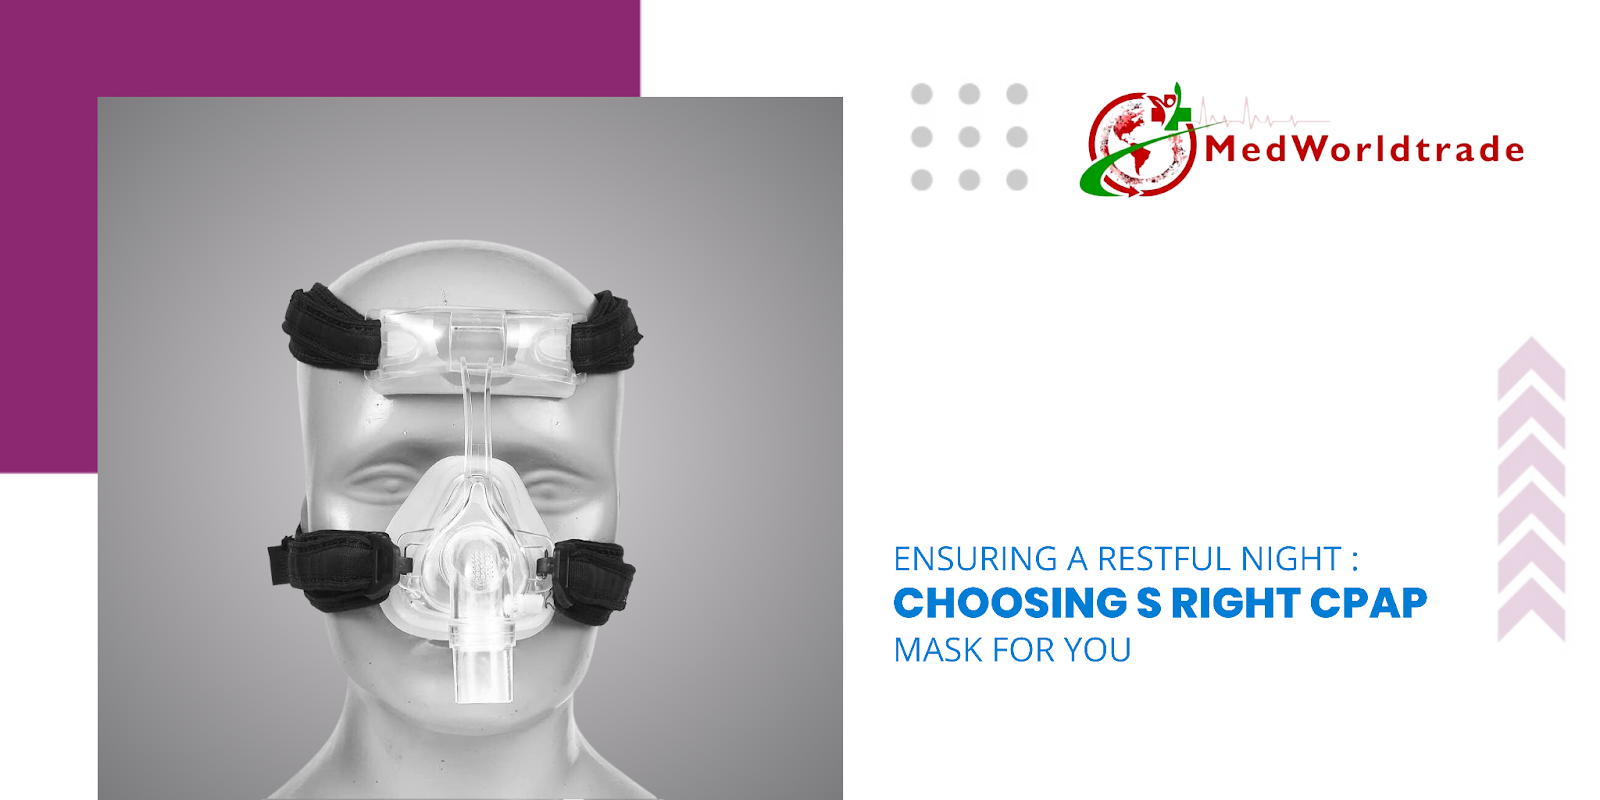 Ensuring a Restful Night: Choosing the Right CPAP Mask for You